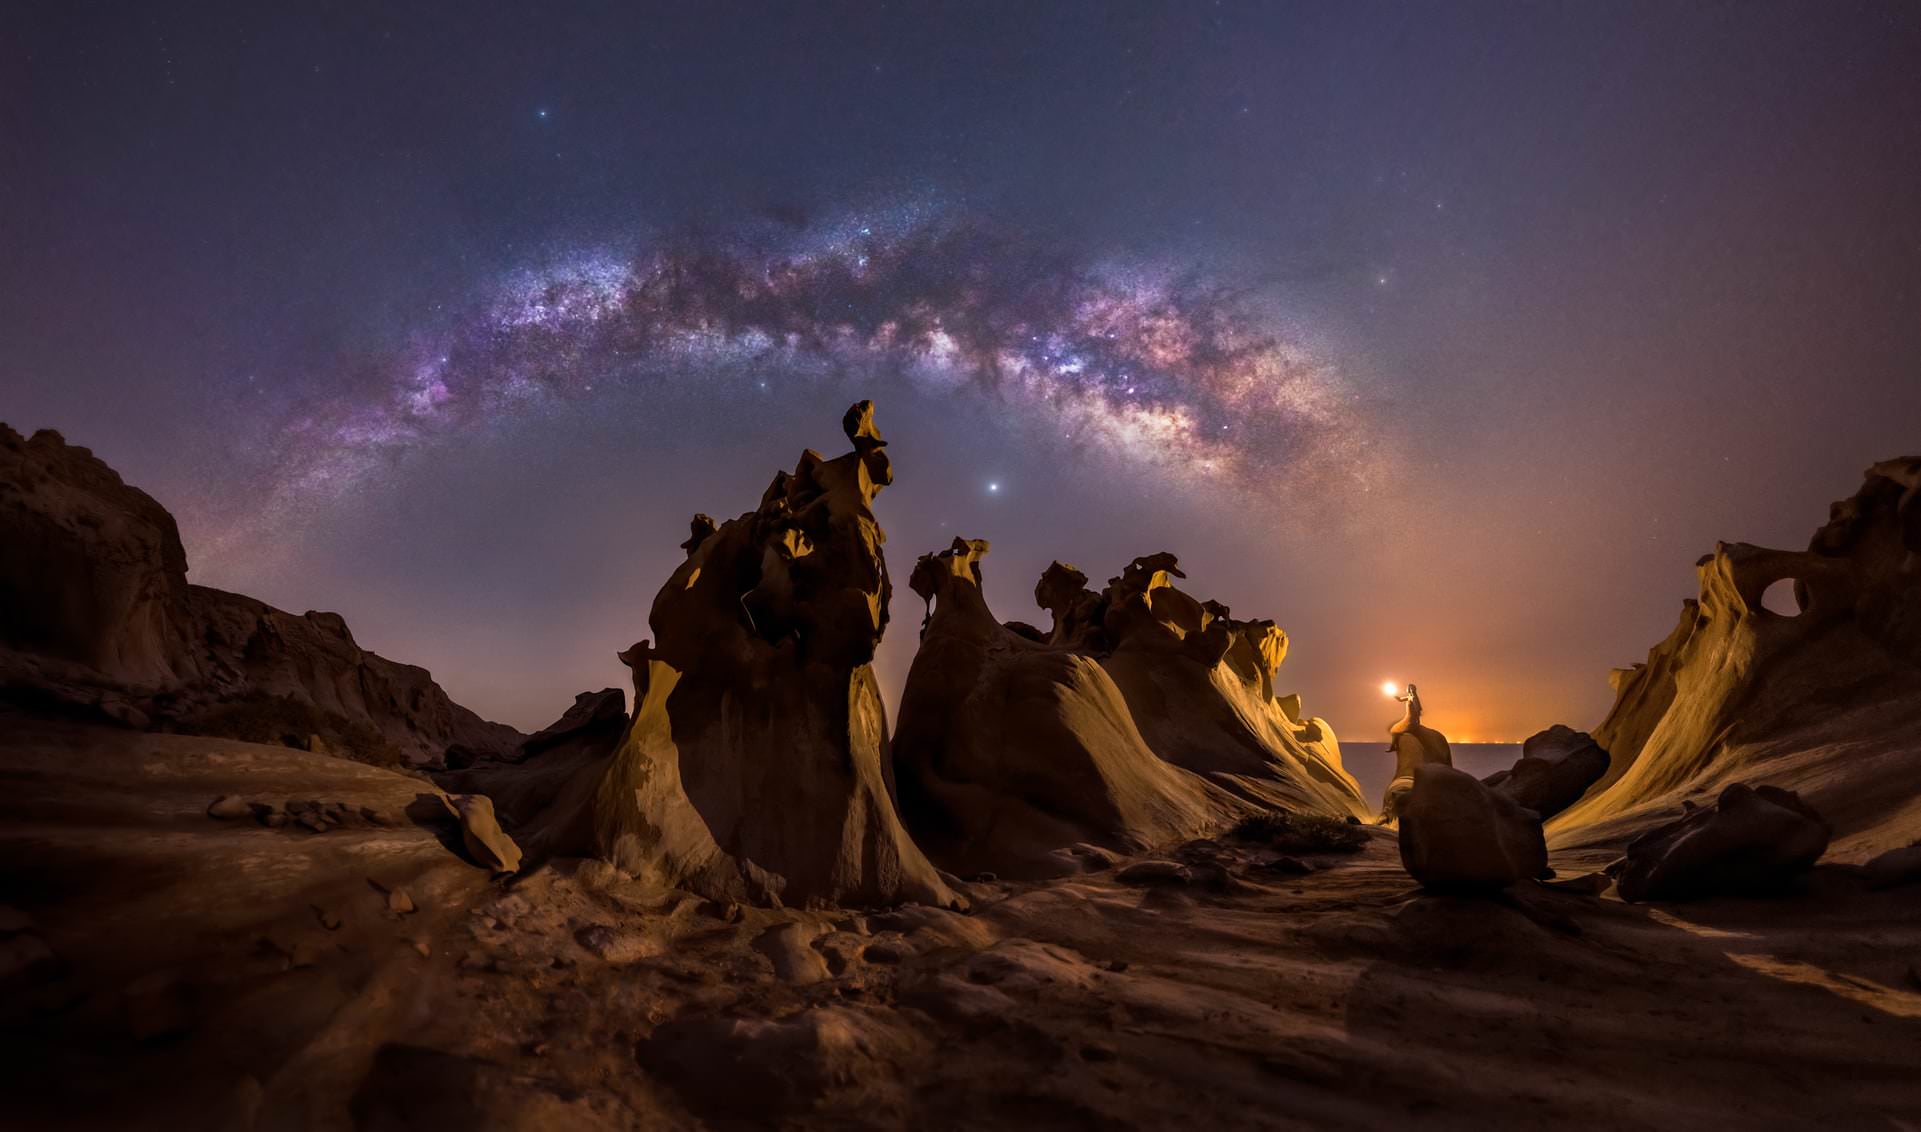 Lovers of the night / Mohammad Hayati / Hormozgan Province, Persian Gulf, Iran / Photographer of the Year of the Milky Way Galaxy 2021